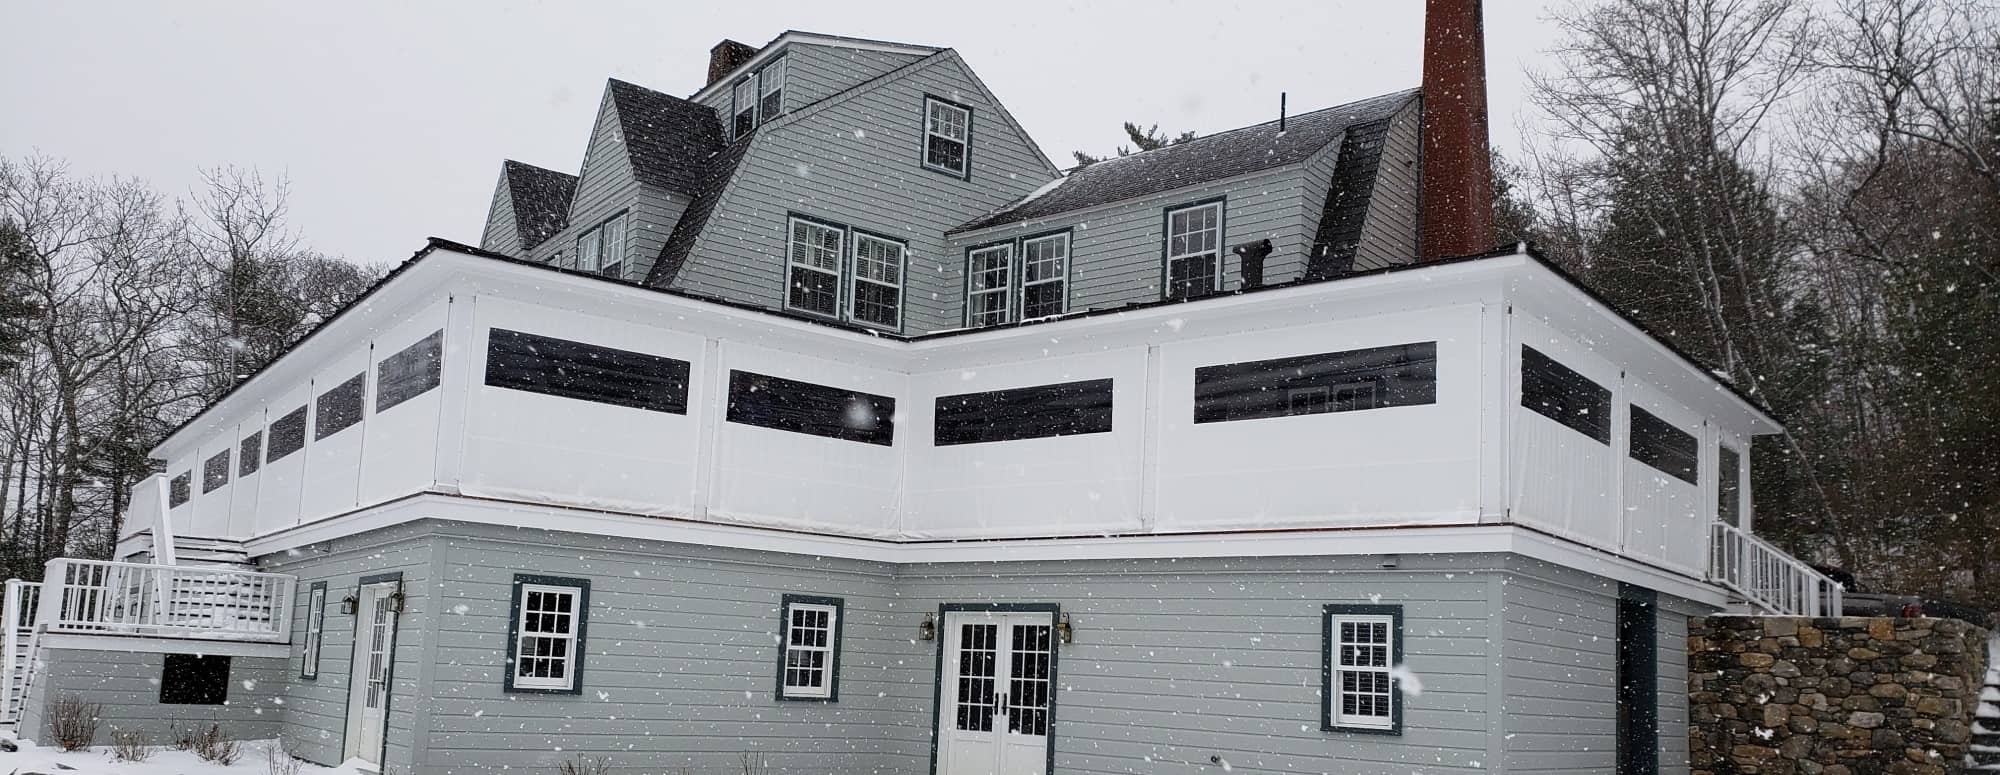 Winter panels protect house in Camden Maine